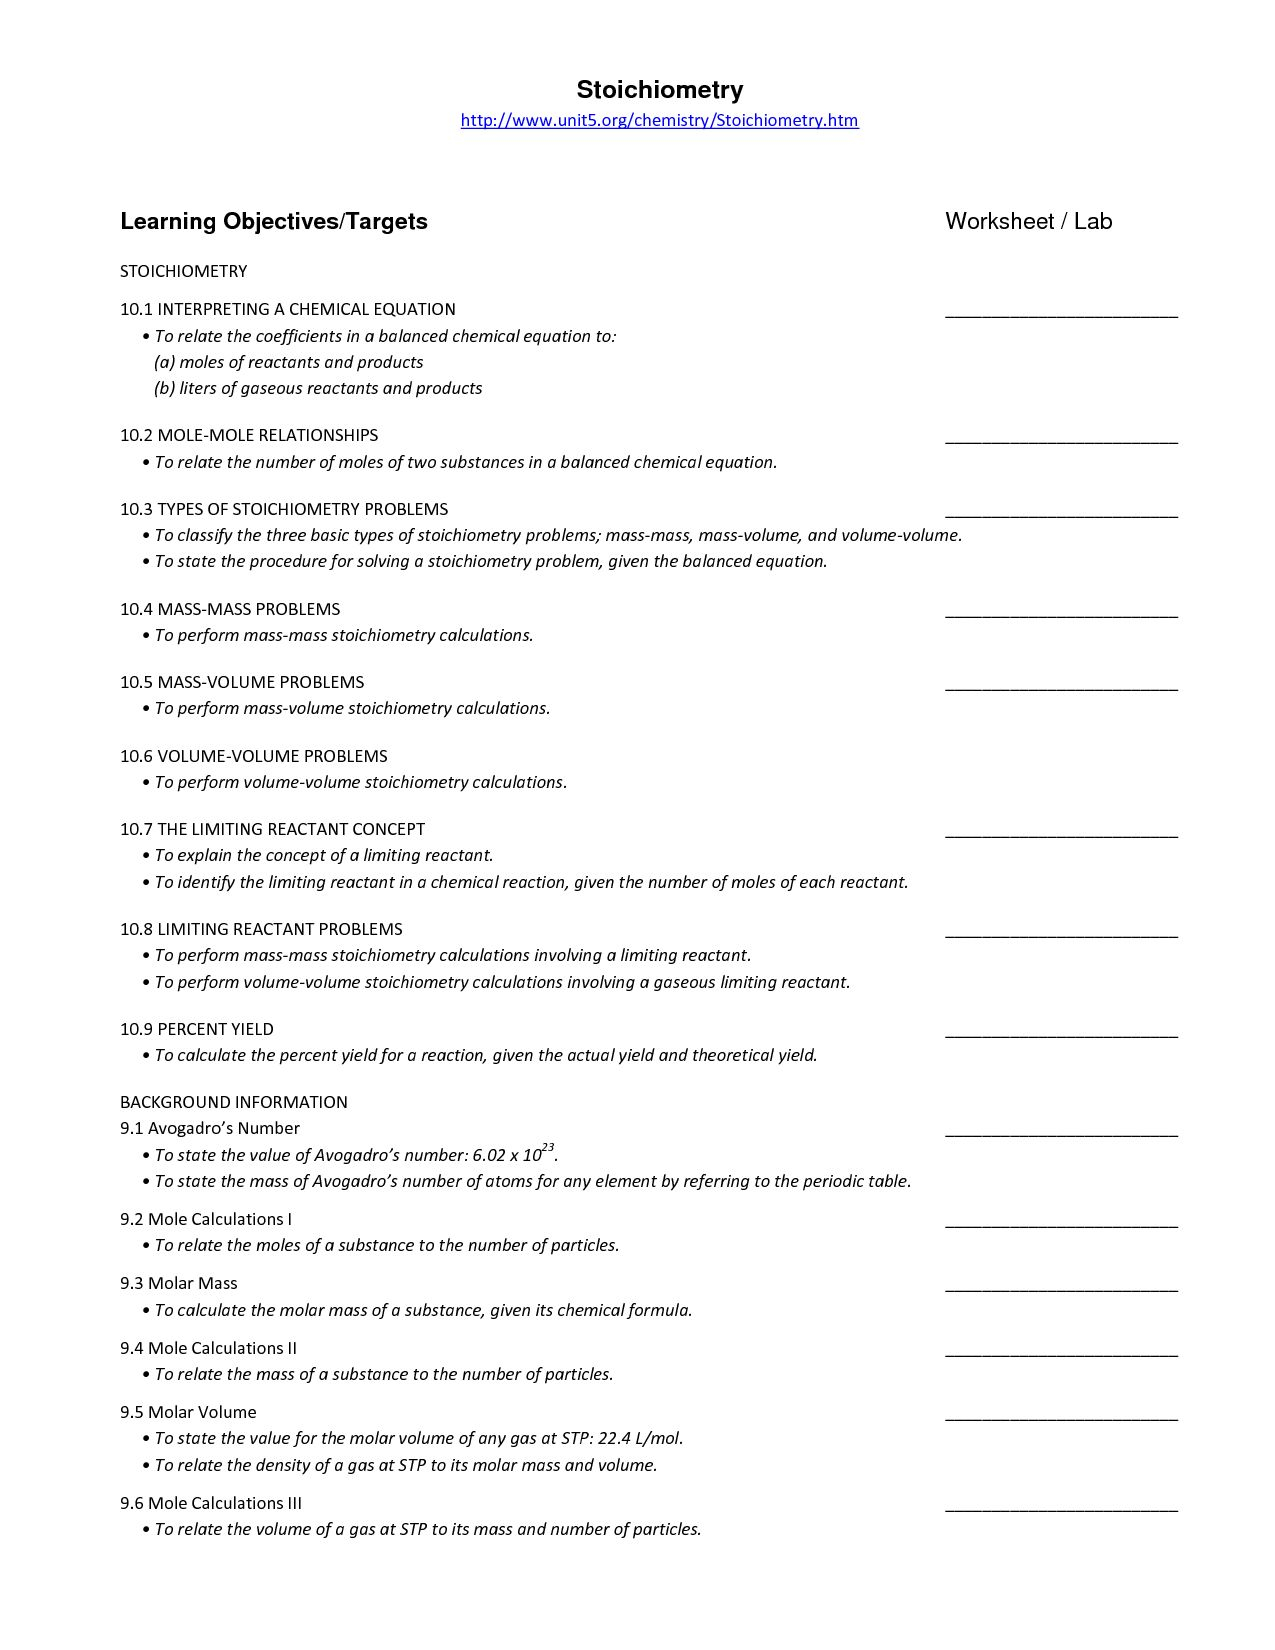 Mixed Mole Problems Worksheet Answers  Briefencounters Within Mixed Mole Problems Worksheet Answers